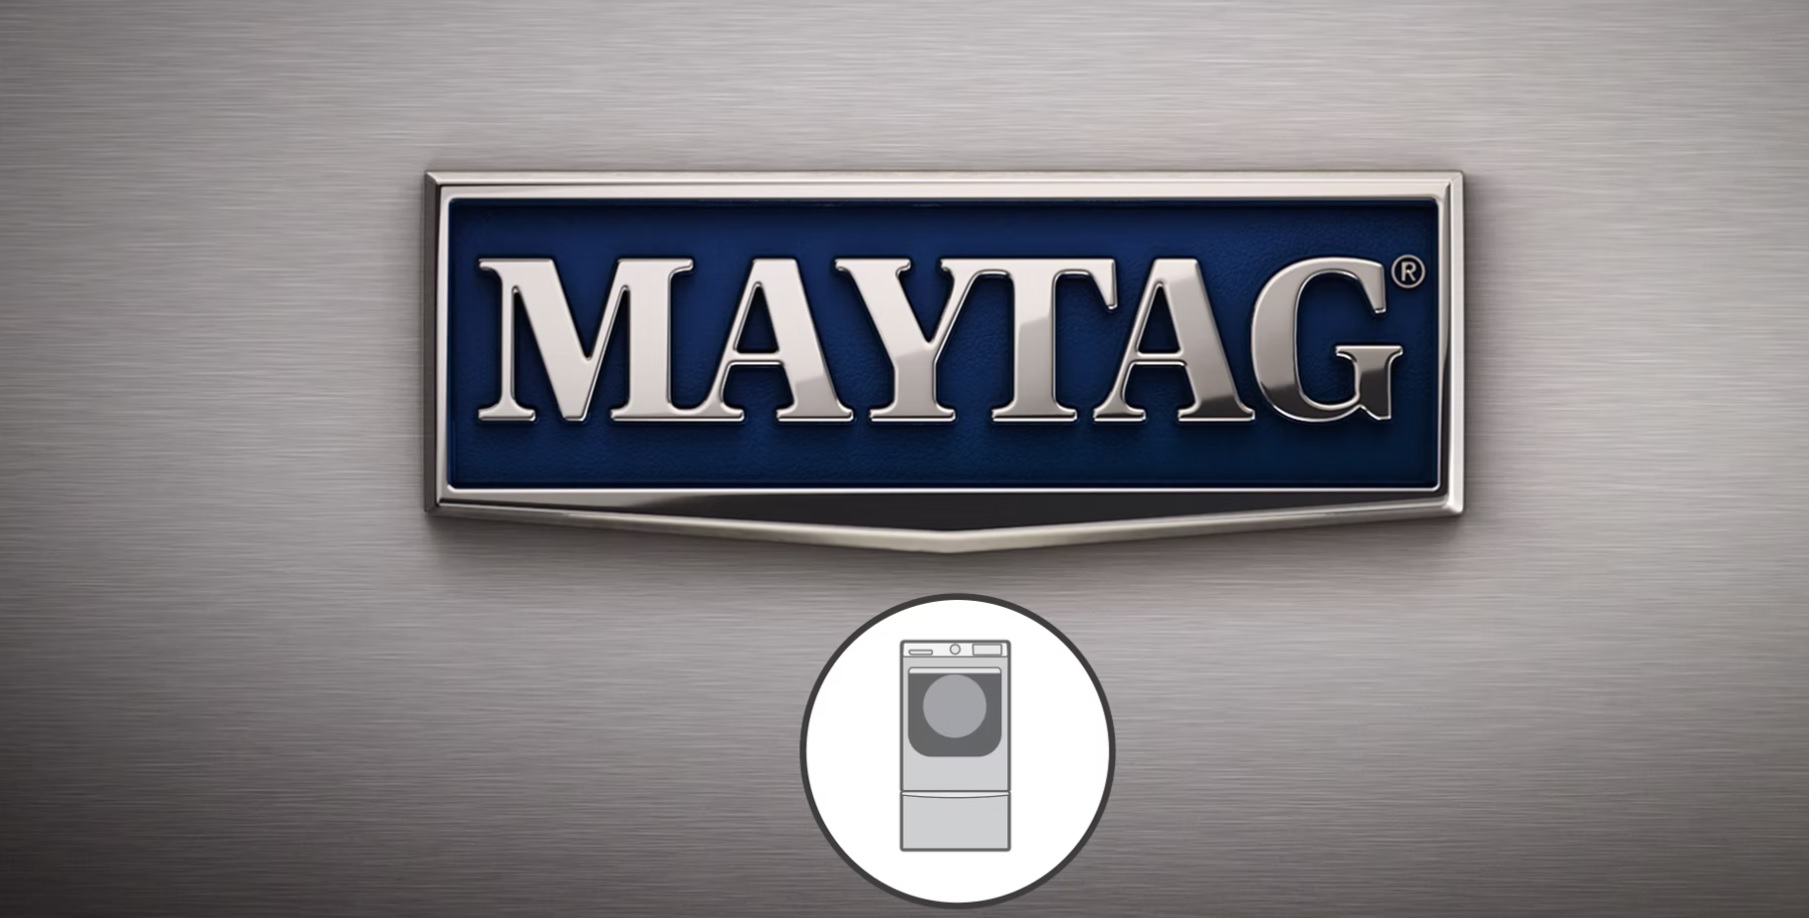 Take advantage of smart features and stay in control from virtually anywhere by connecting your Smart appliances to your home network and to the Maytag® app on your smartphone or tablet.
The following instructions are for connecting your Maytag® Smart front load washer or dryer to the internet.